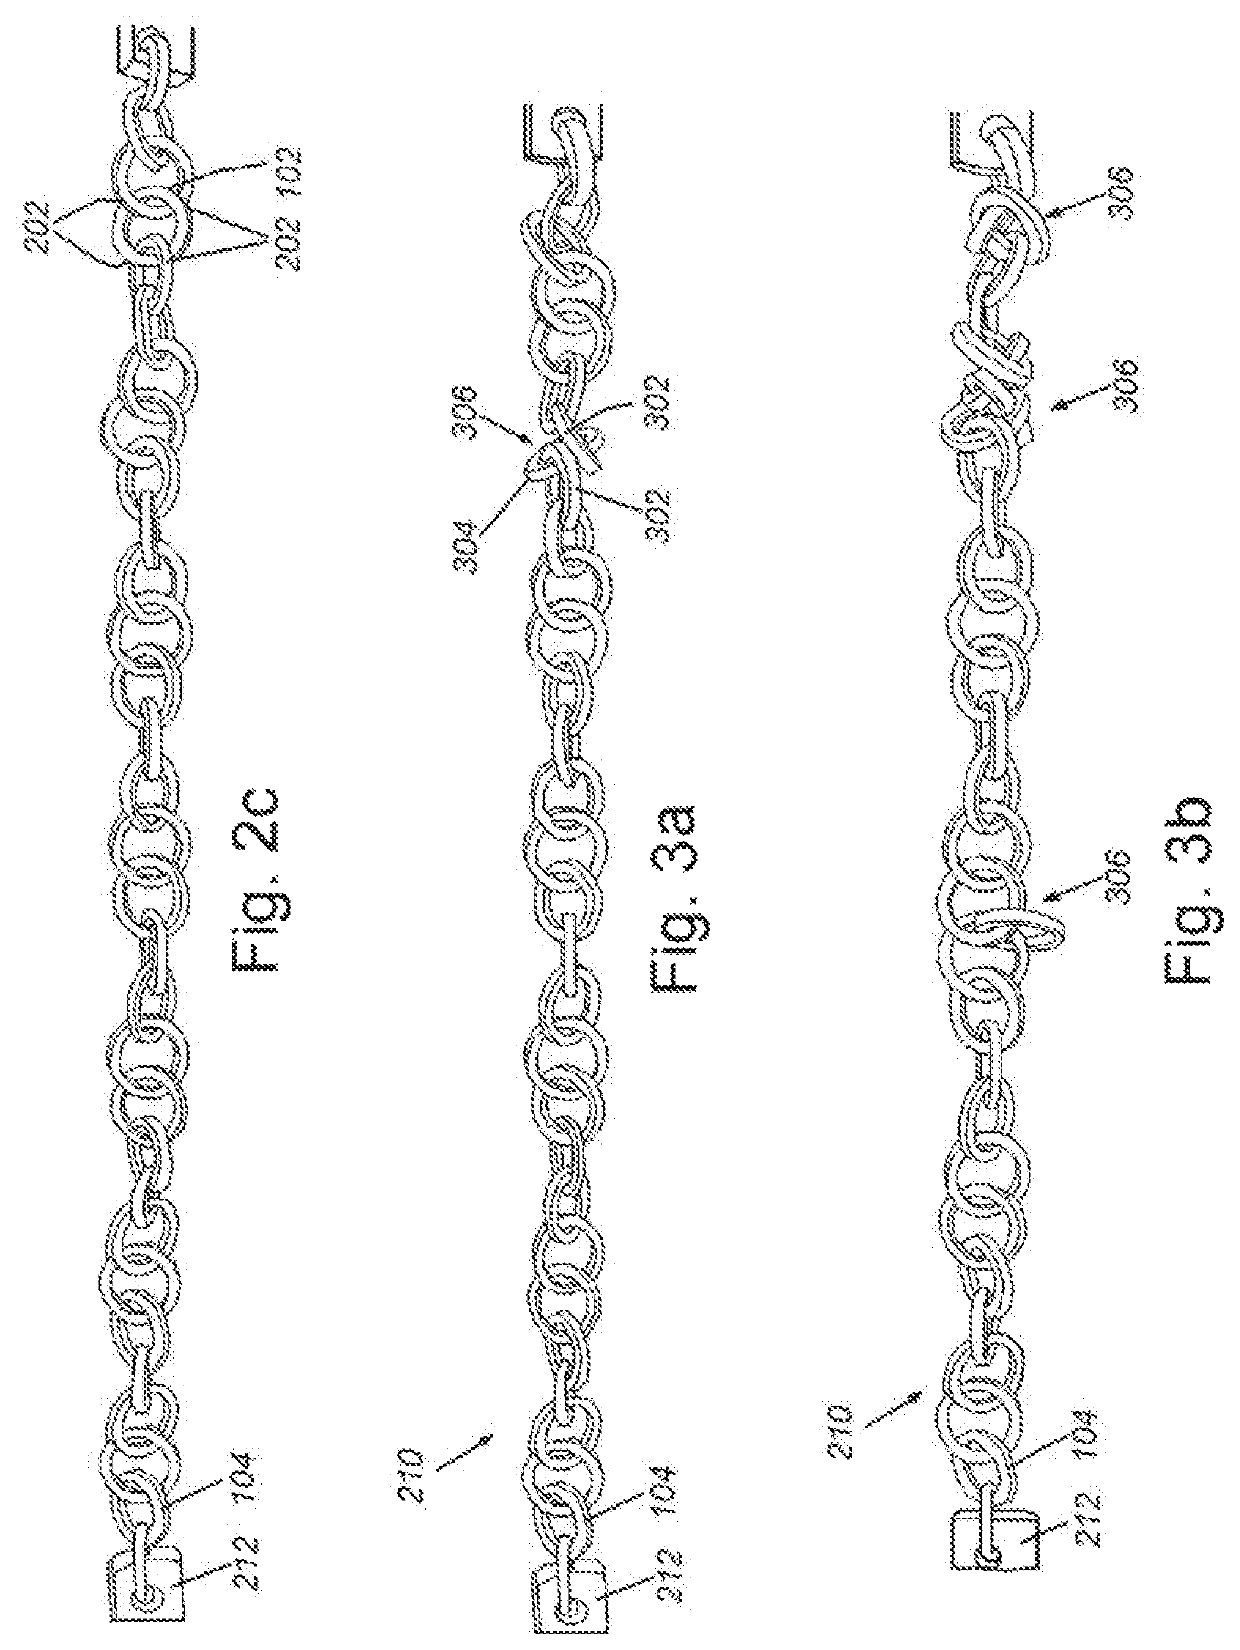 System and method for conversion of rotational motion into linear actuation by mechanical stacking or unstacking of connected links